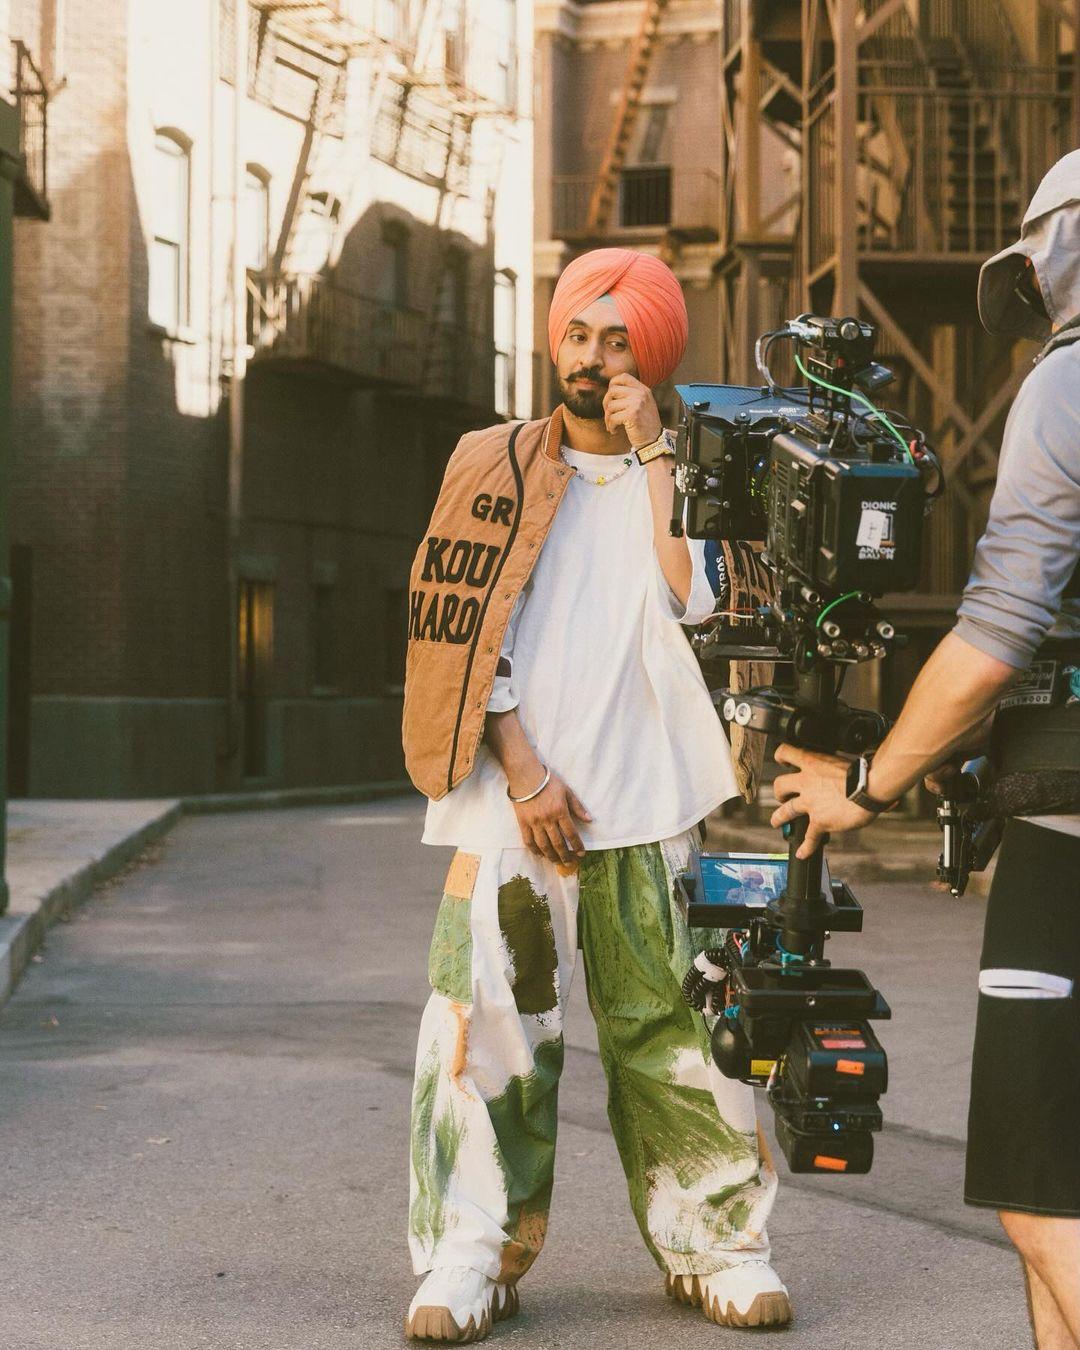 Diljit Dosanjh managed to ooze all kinds of cool vibes in this ensemble. The gifted talent wore abstract printed pants with a white t-shirt, which he paired with an orange jacket that complemented the pants